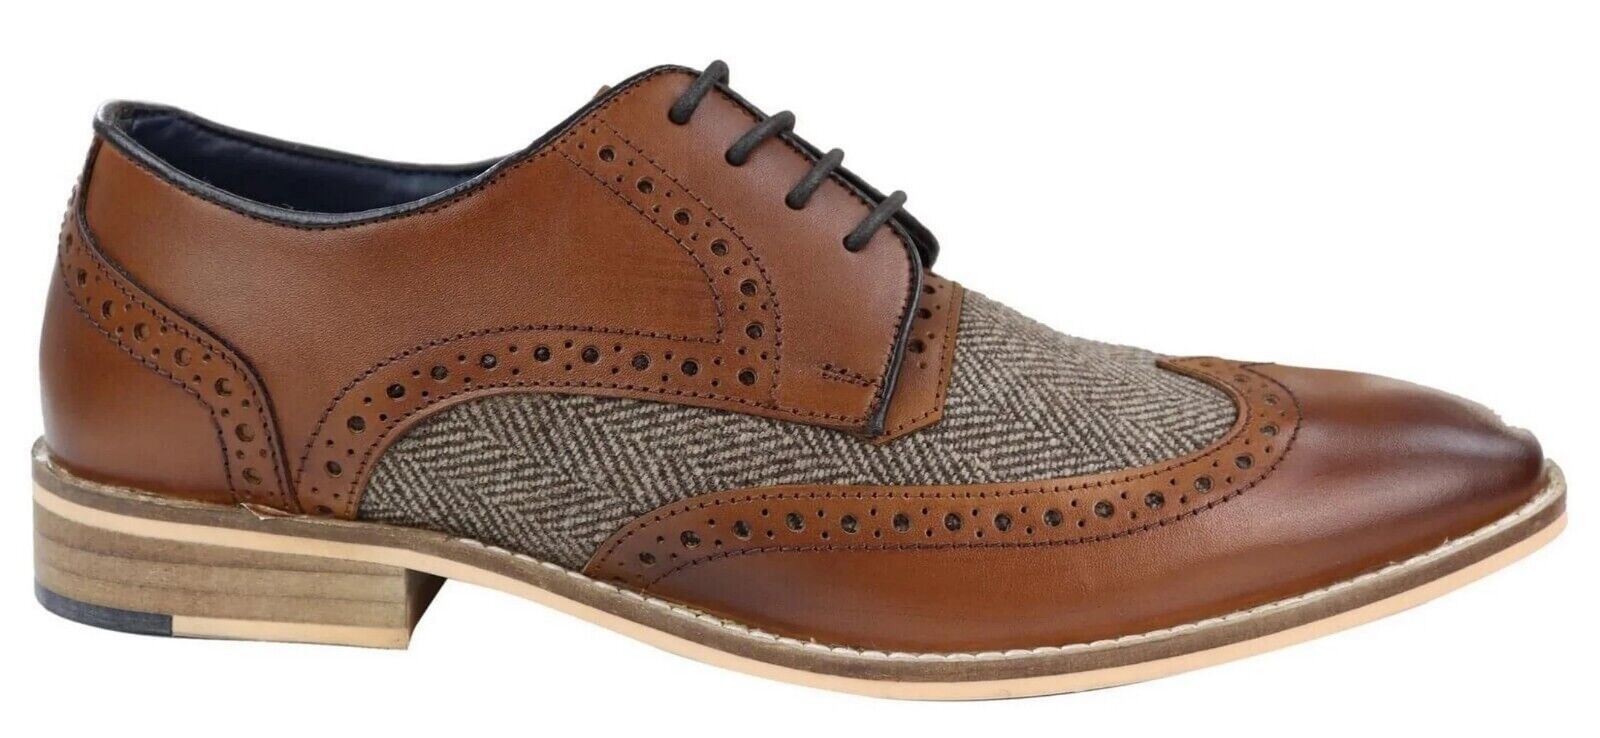 Mens Classic Oxford Tweed Brogue Derby Shoes in Tan Leather - Upperclass Fashions 